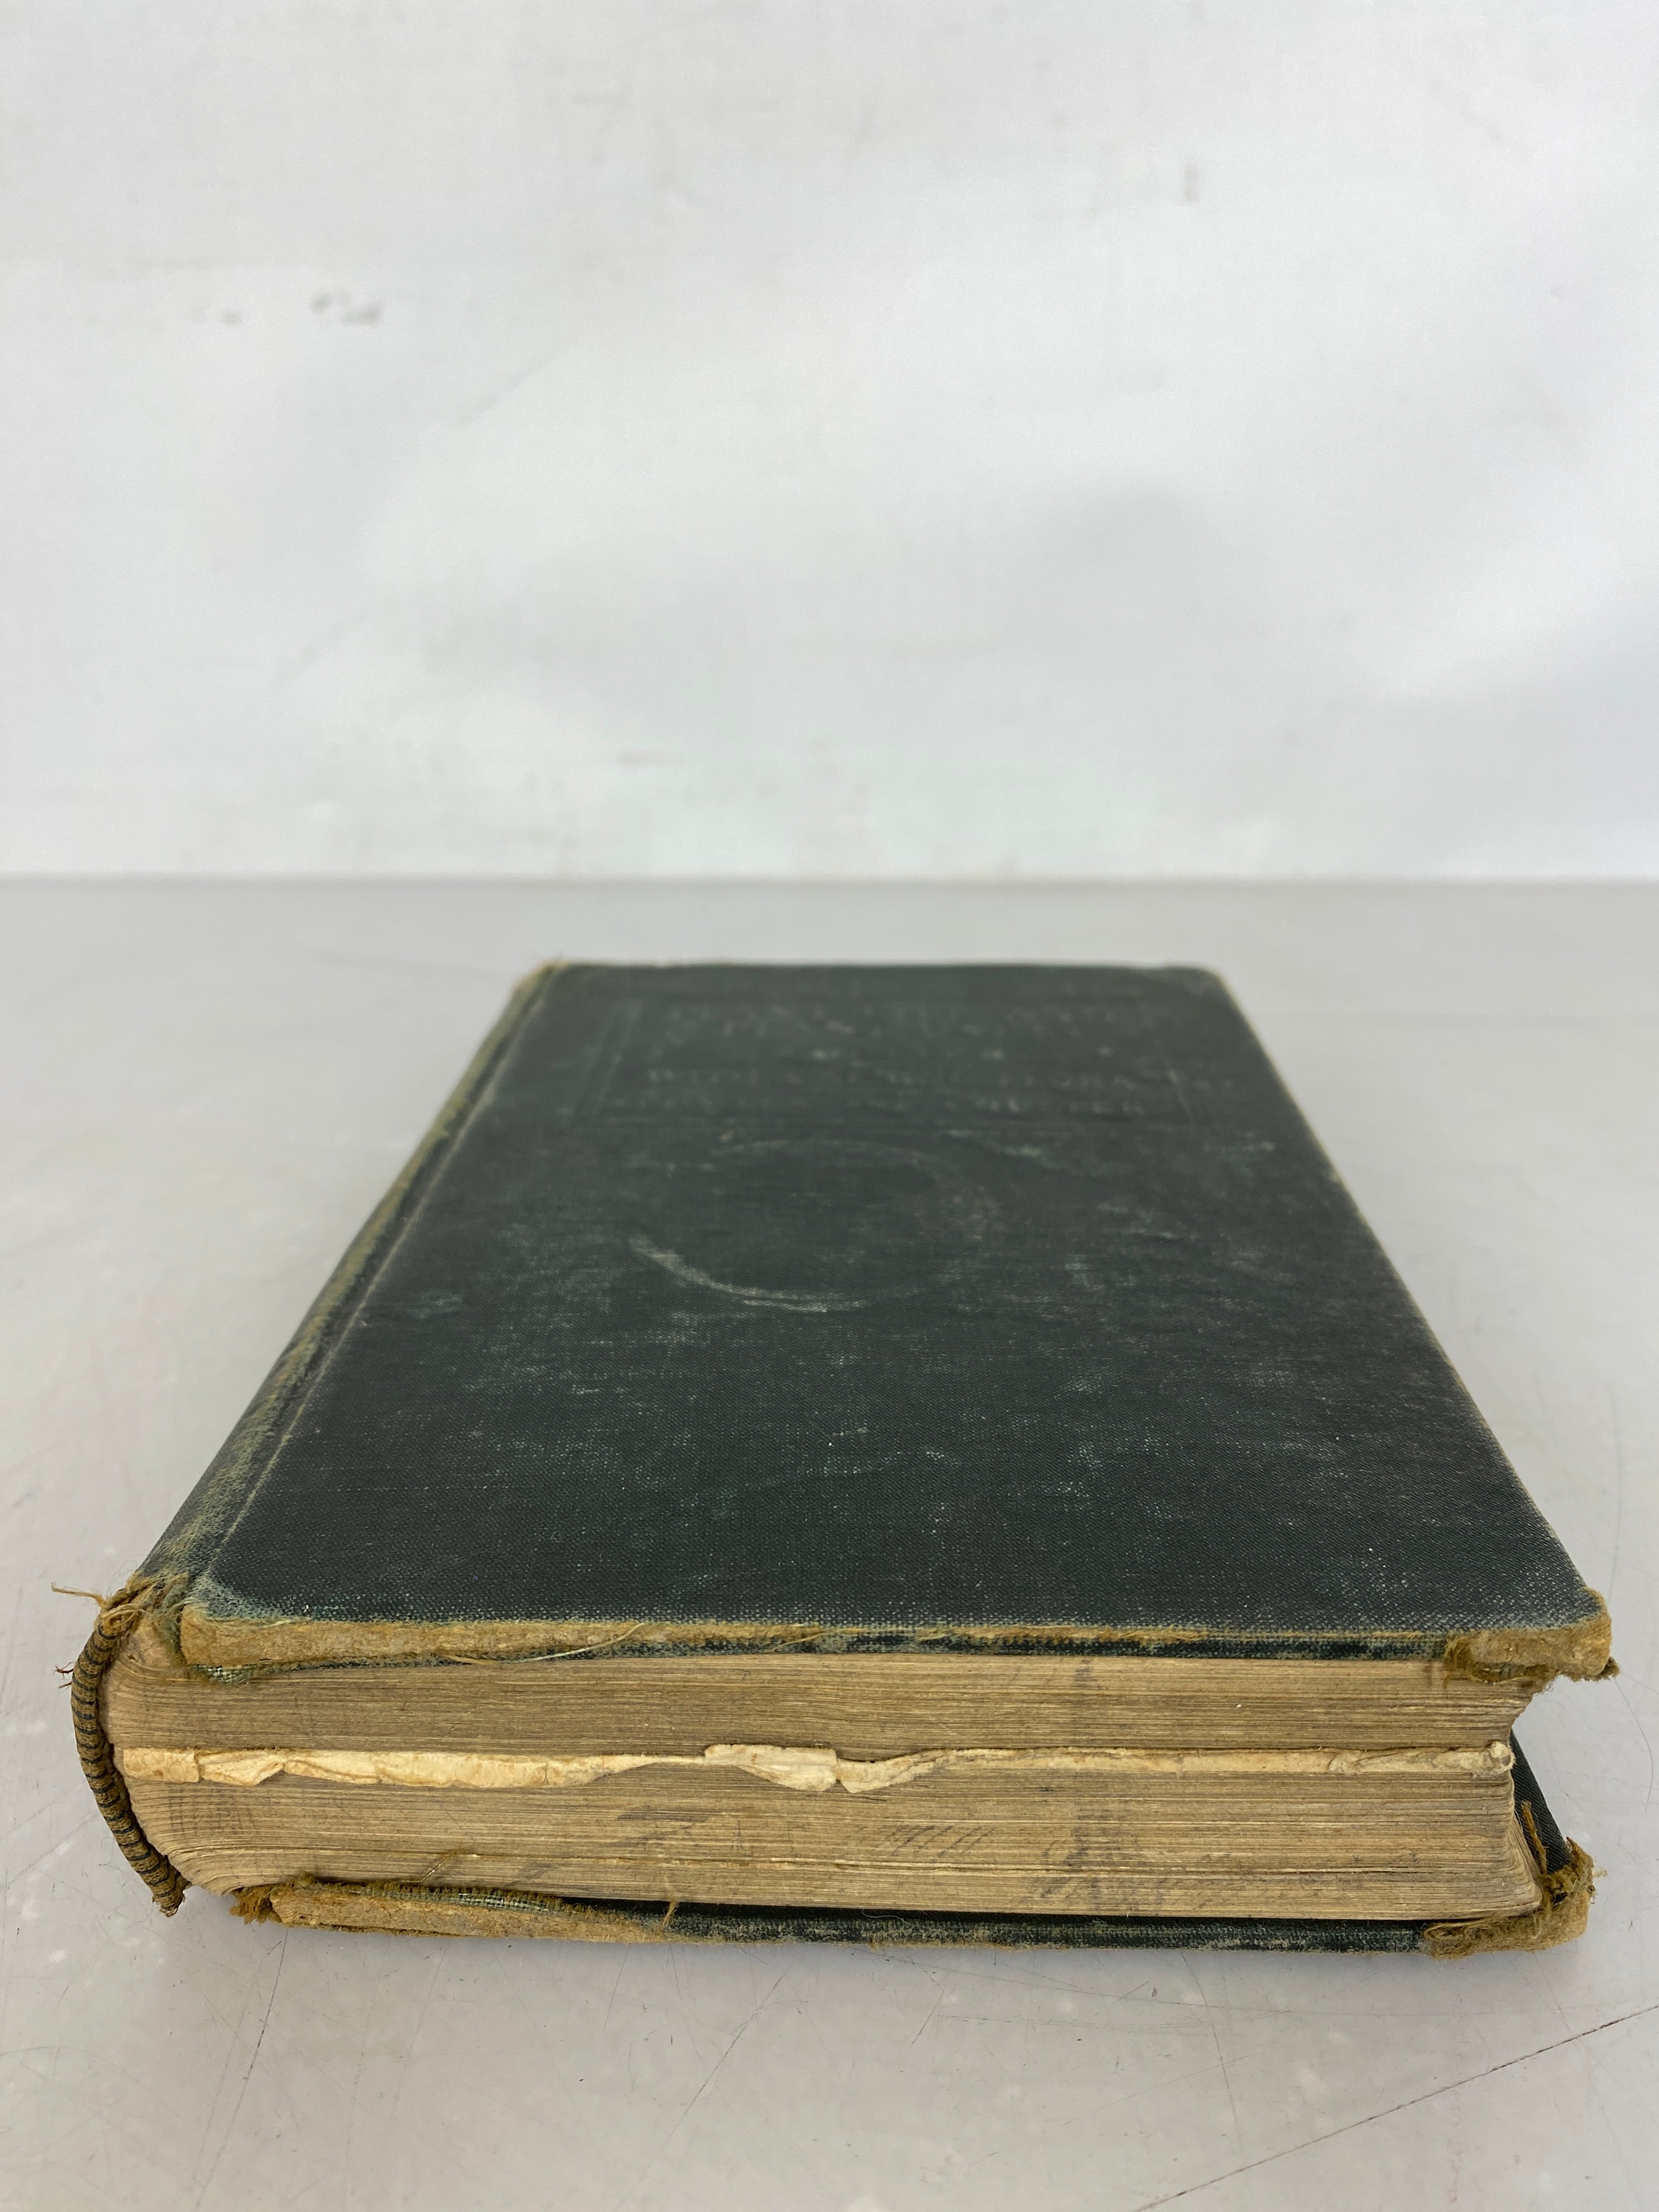 Plant Life and Plant Uses With A Spring Flora by Coulter 1915 HC